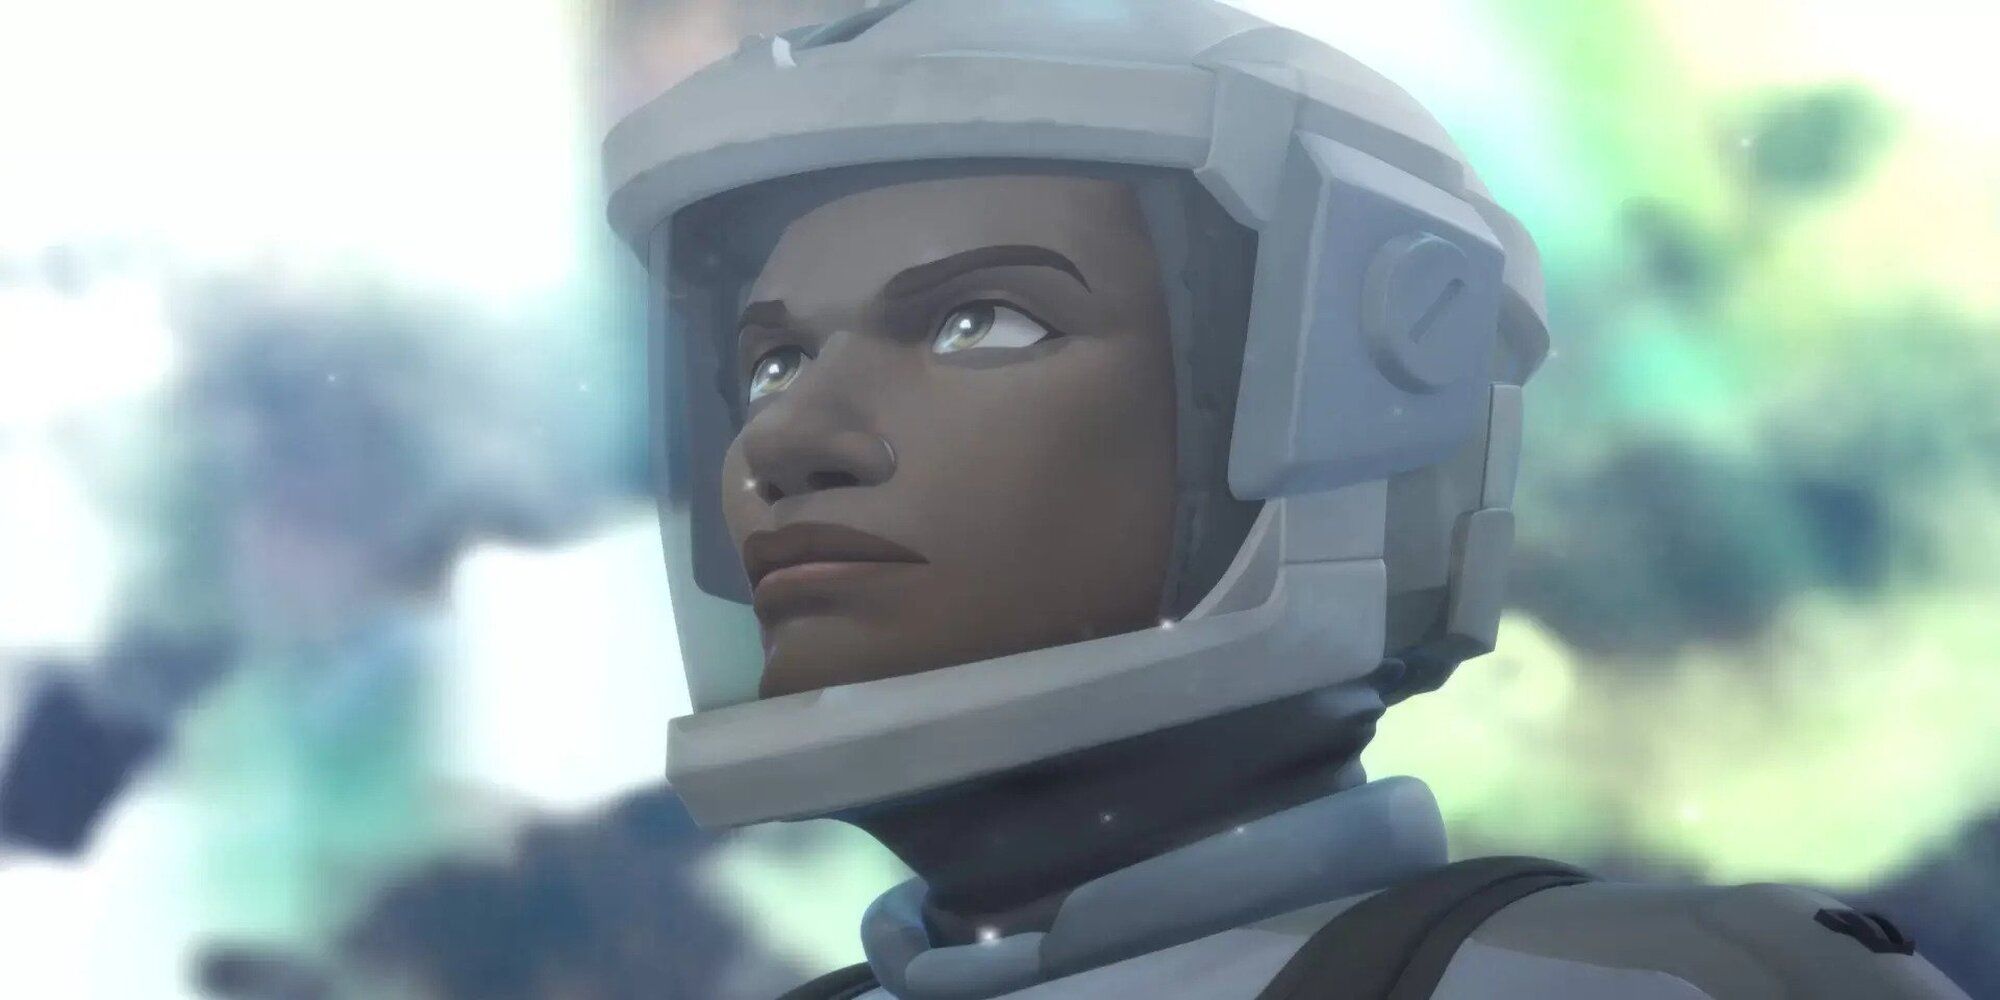 Jin wears a spacesuit and looks up in Make My Day image.